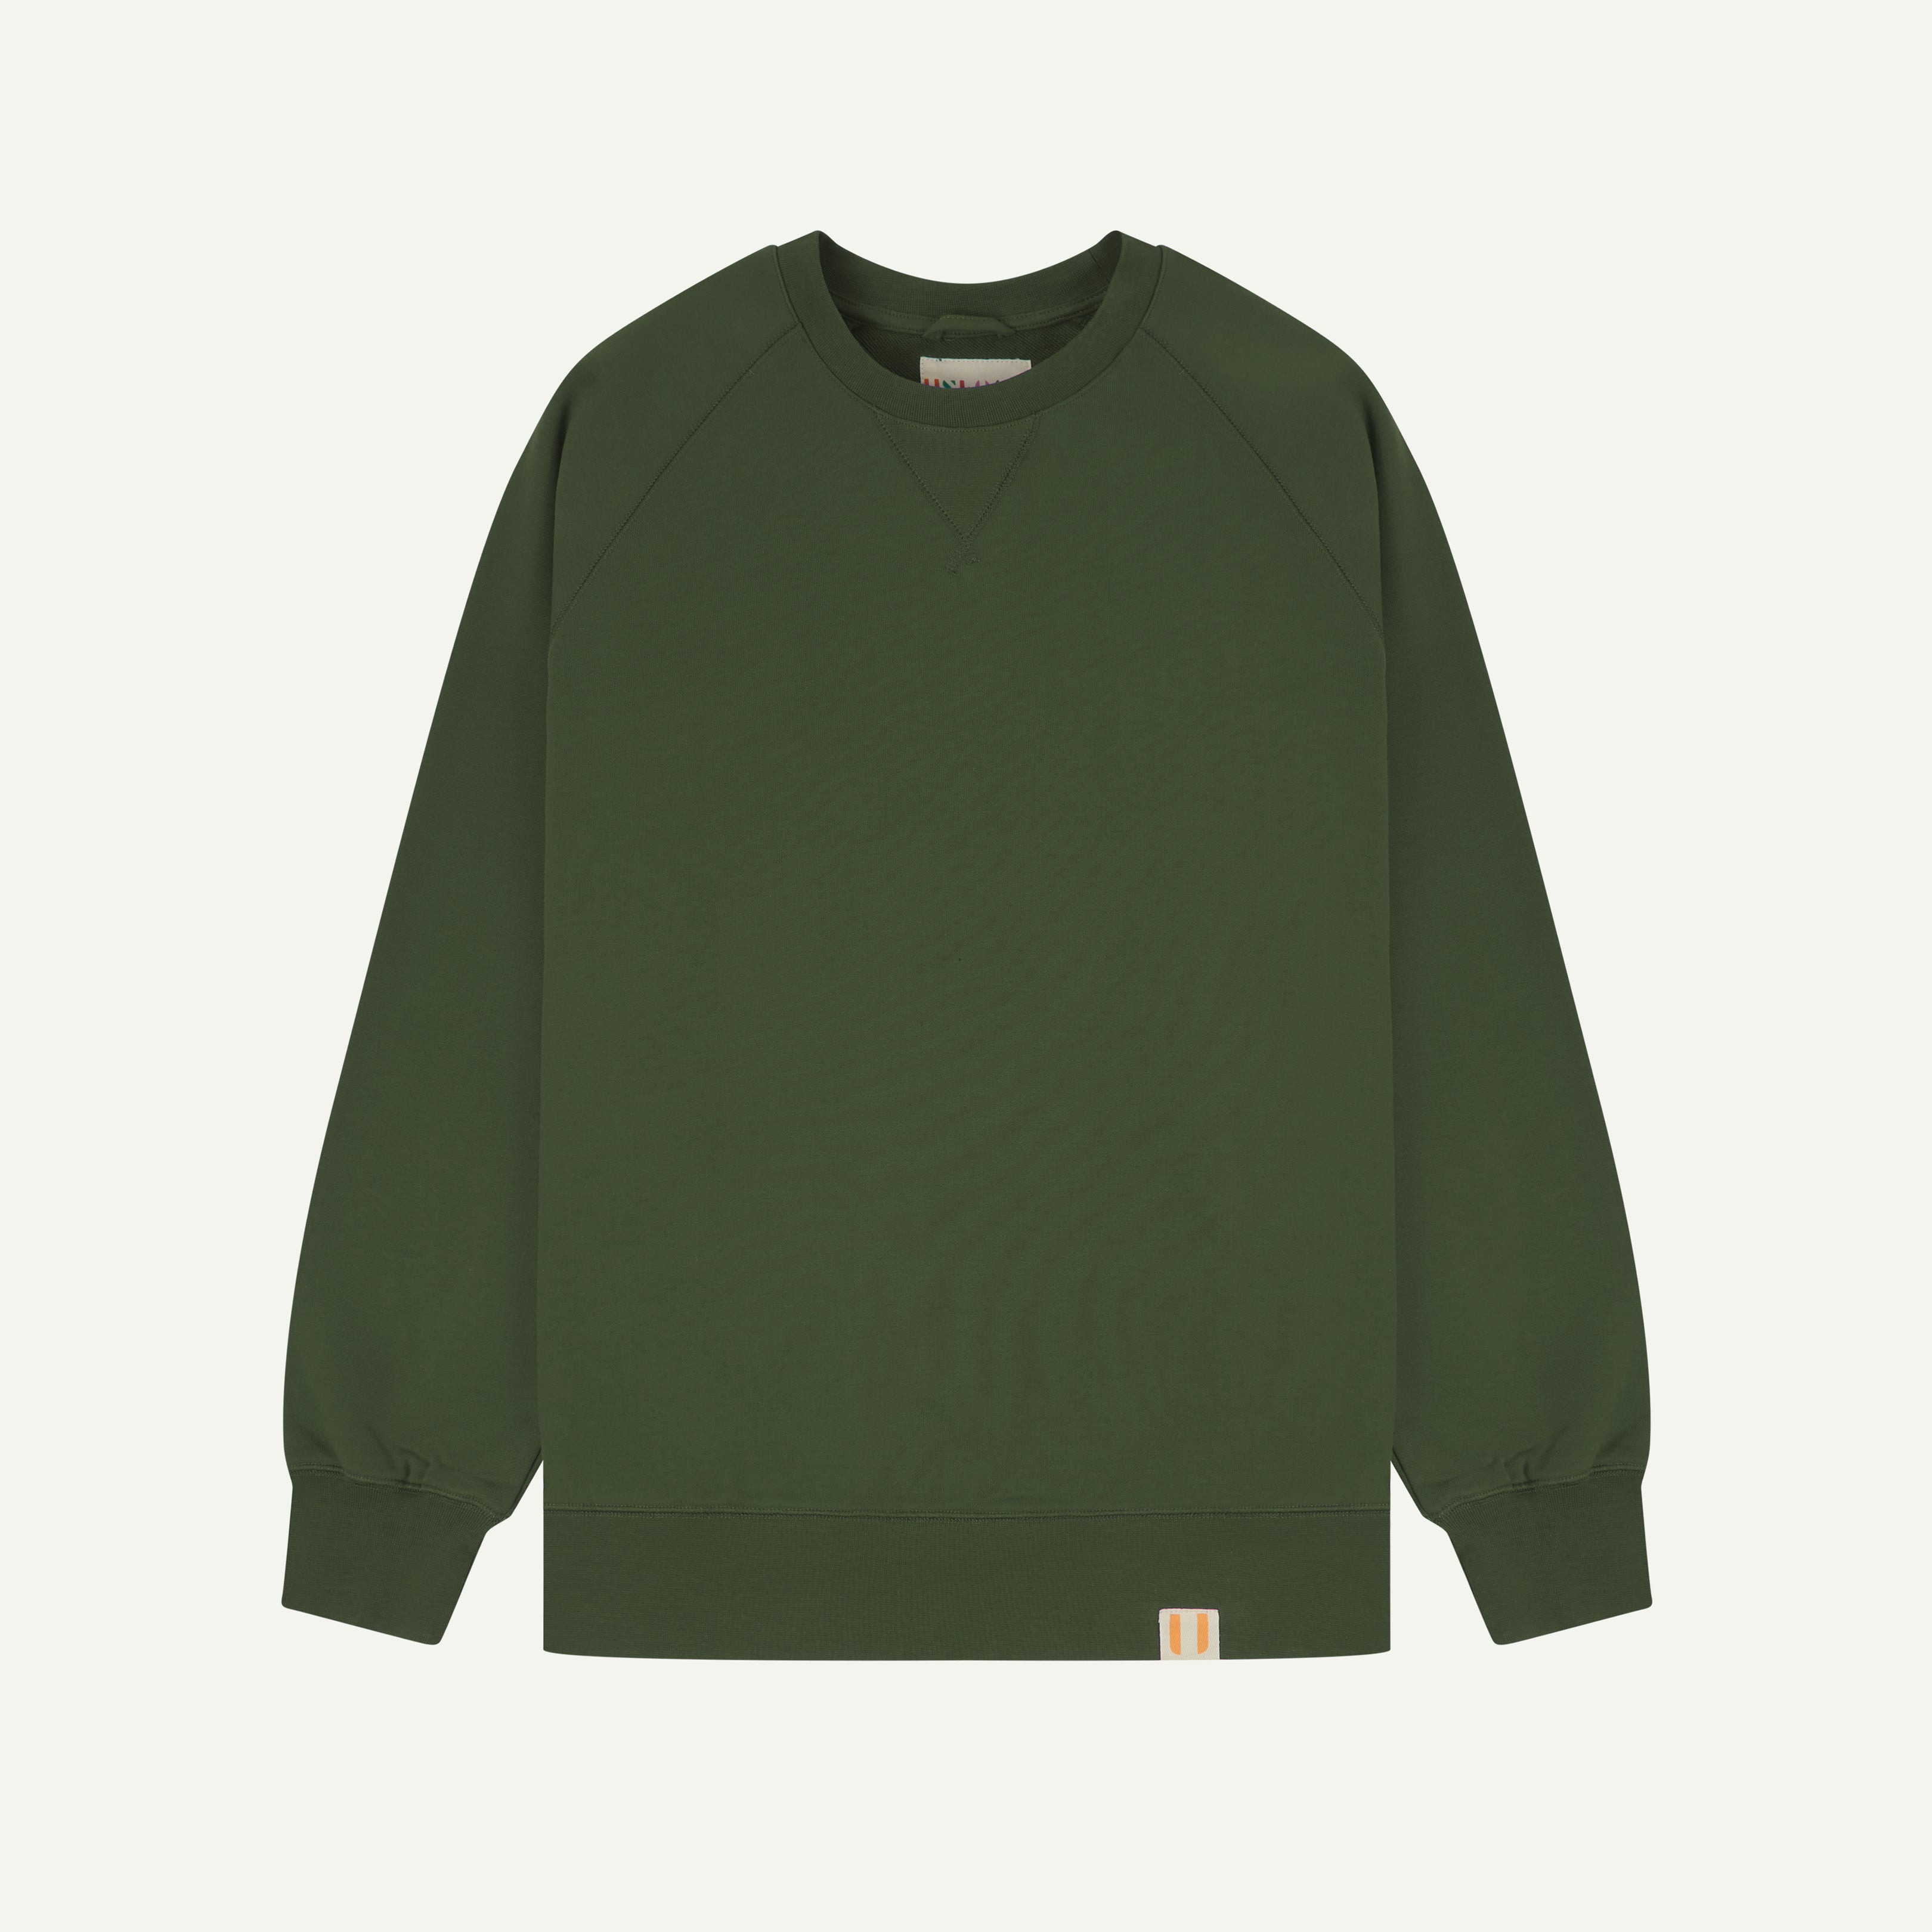 Front view of green organic heavyweight cotton #7005 sweatshirt by Uskees